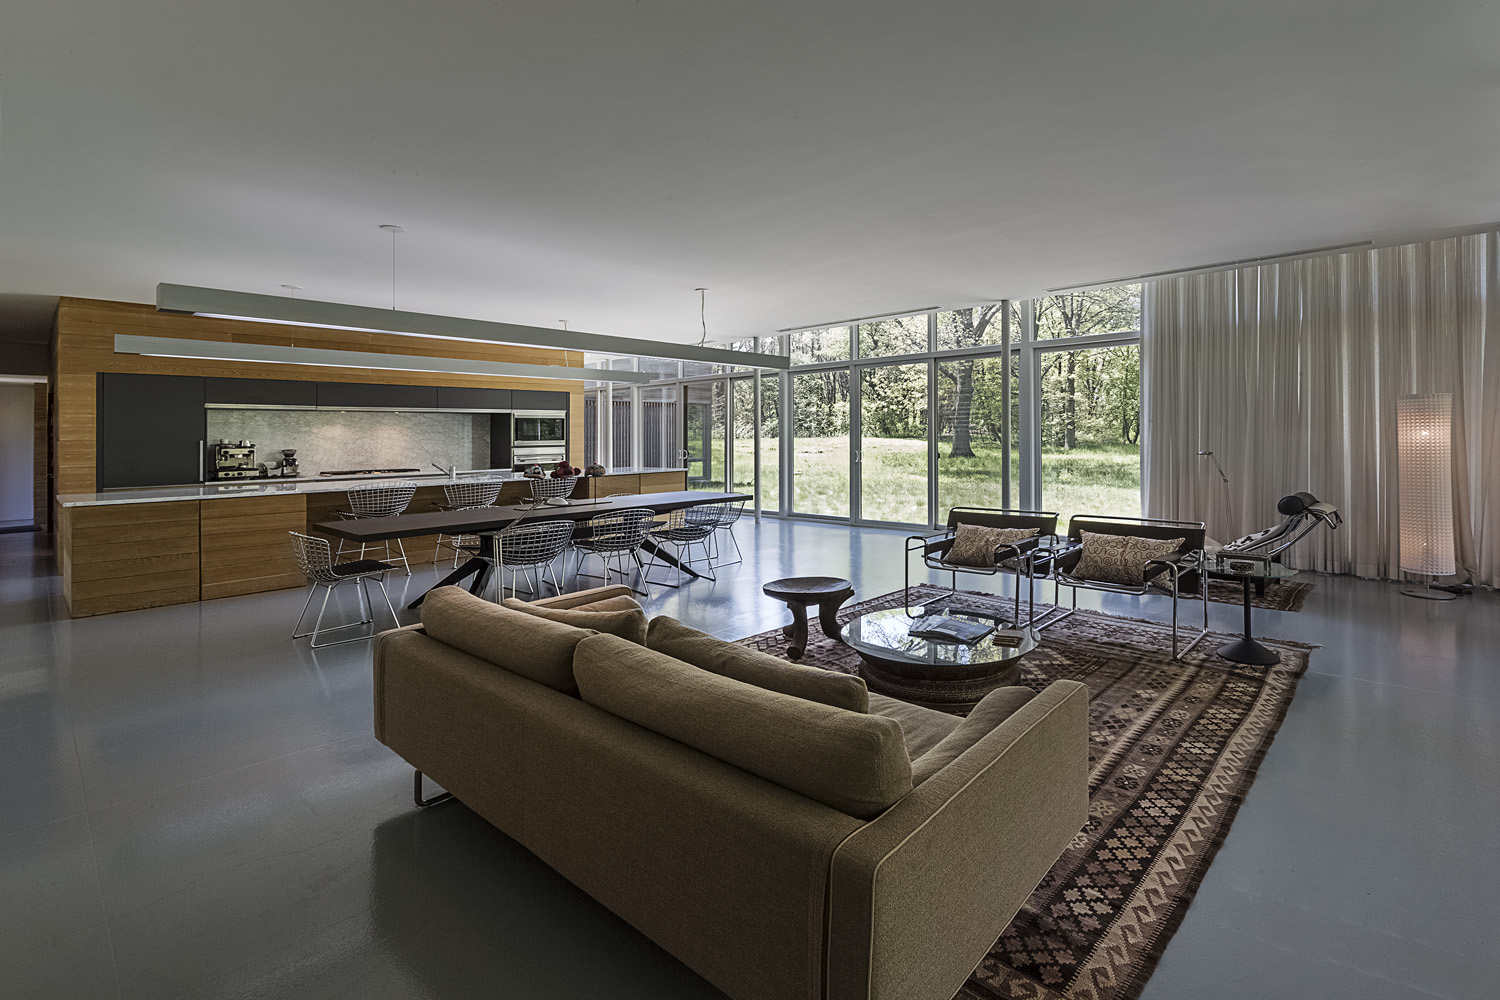 Coffou Residence / Michigan City IN / Brininstool + Lynch Architects / For the New York Times